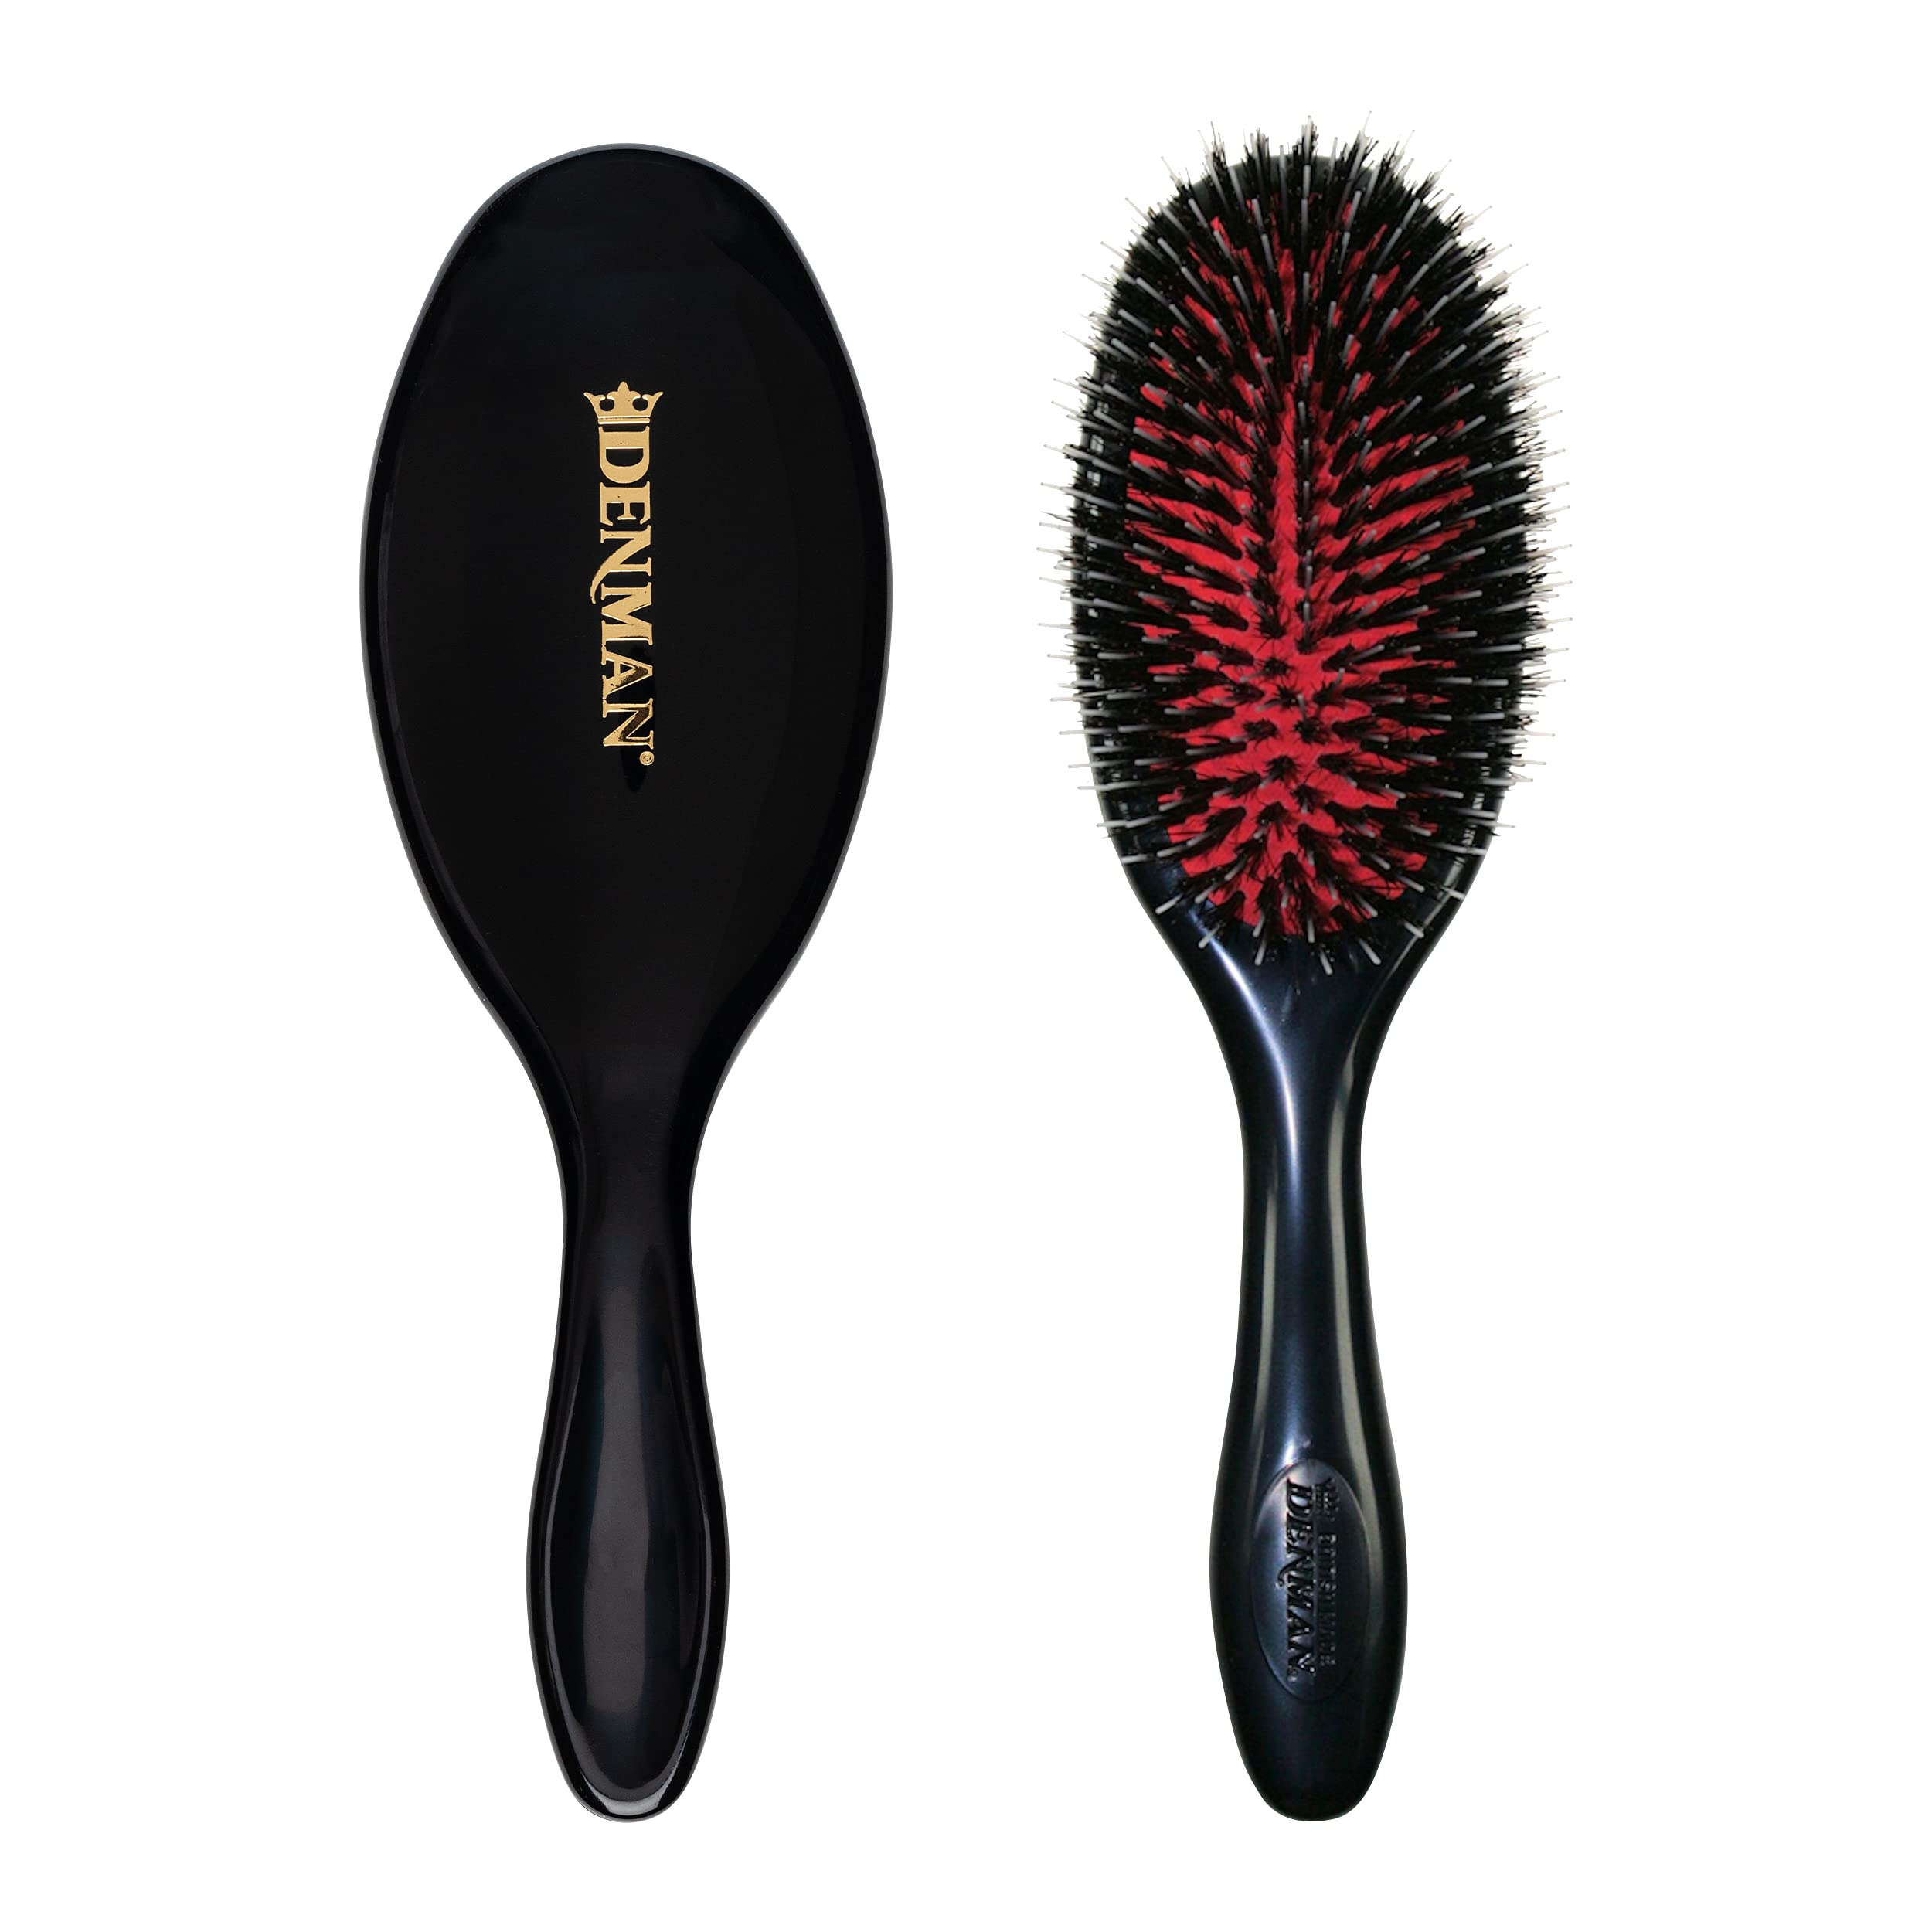 Denman Cushion Hair Brush (Medium) with Soft Nylon Quill Boar Bristles -Detangle and shine, adds gloss and shine to the hair, gently smooths and detangles curls and fly-aways – Black, D81M